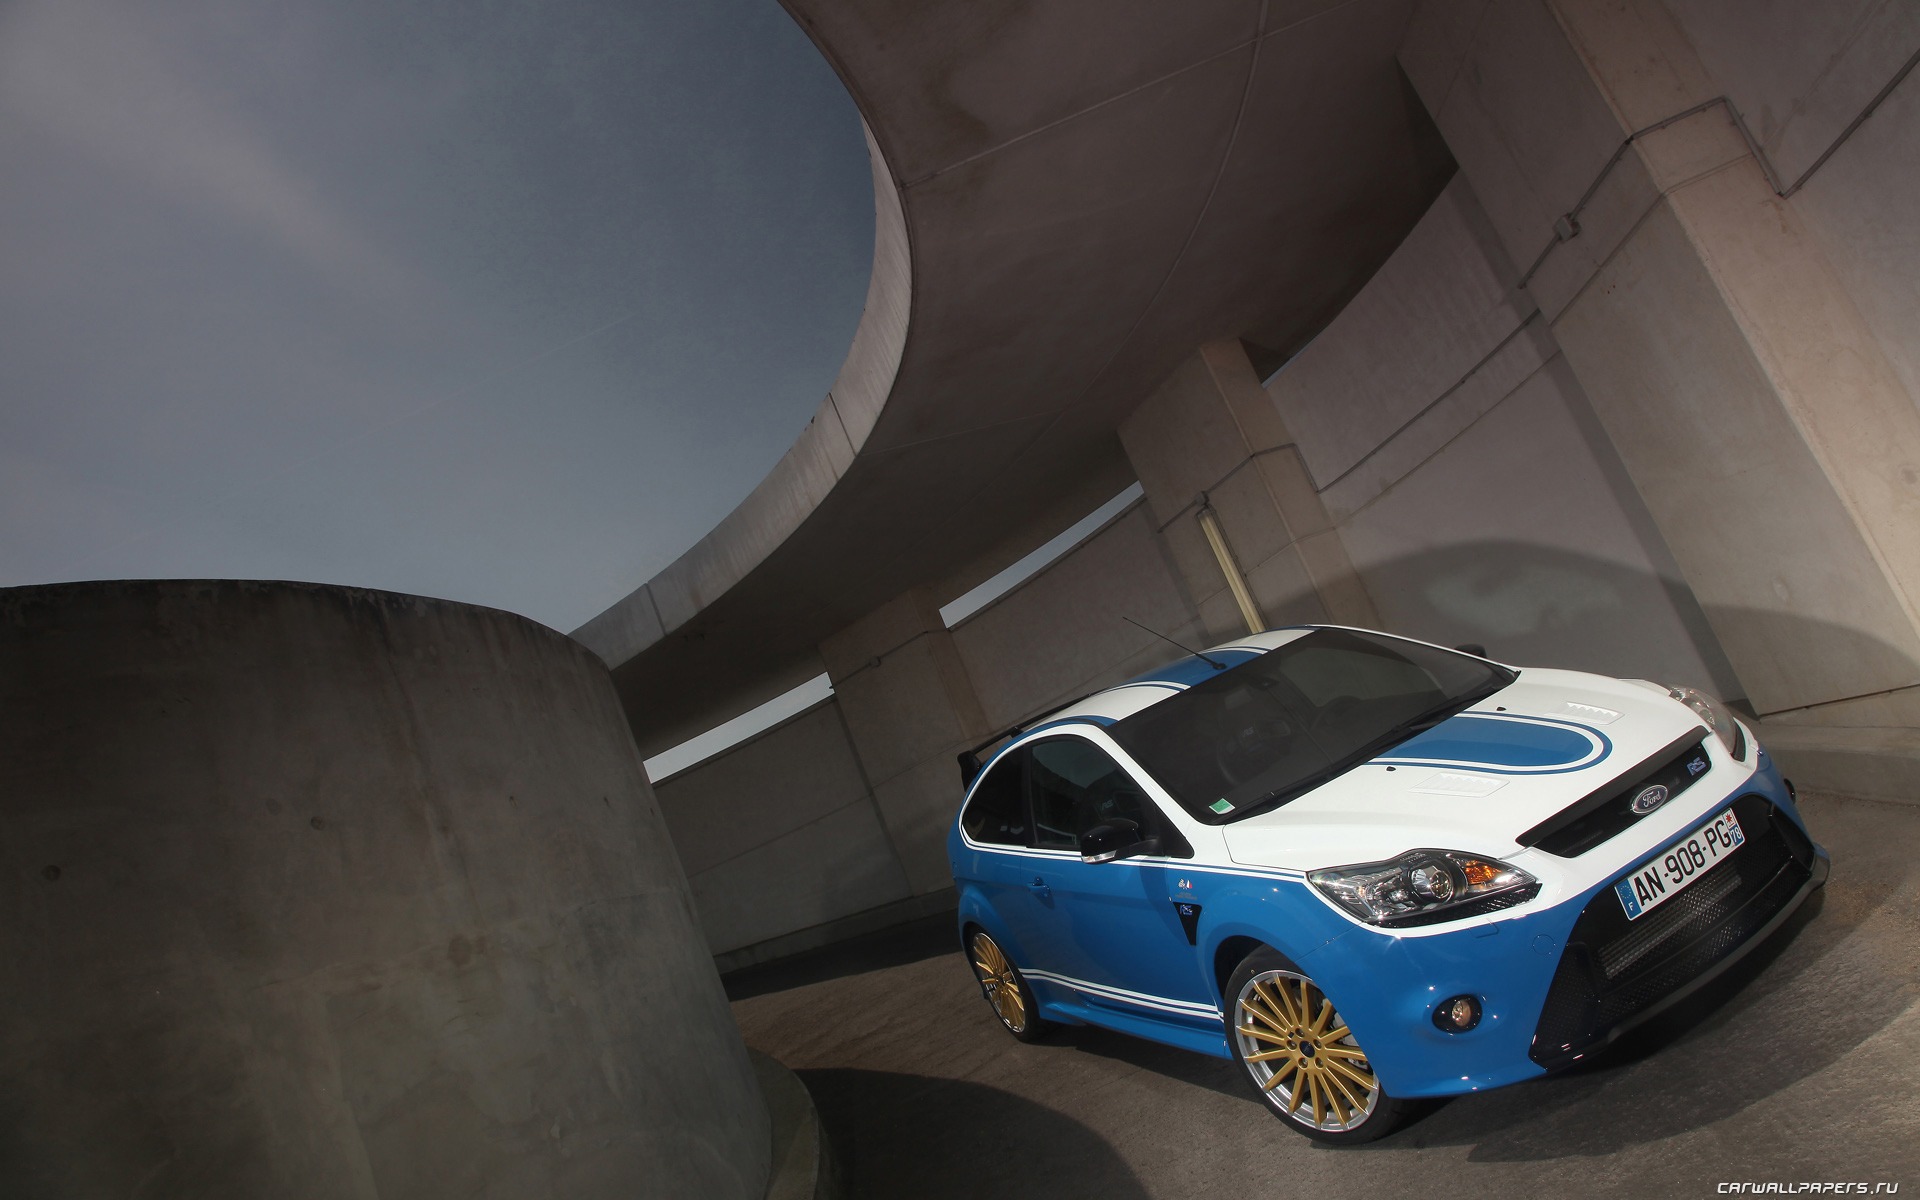 Ford Focus RS Le Mans Classic - 2010 福特 #4 - 1920x1200